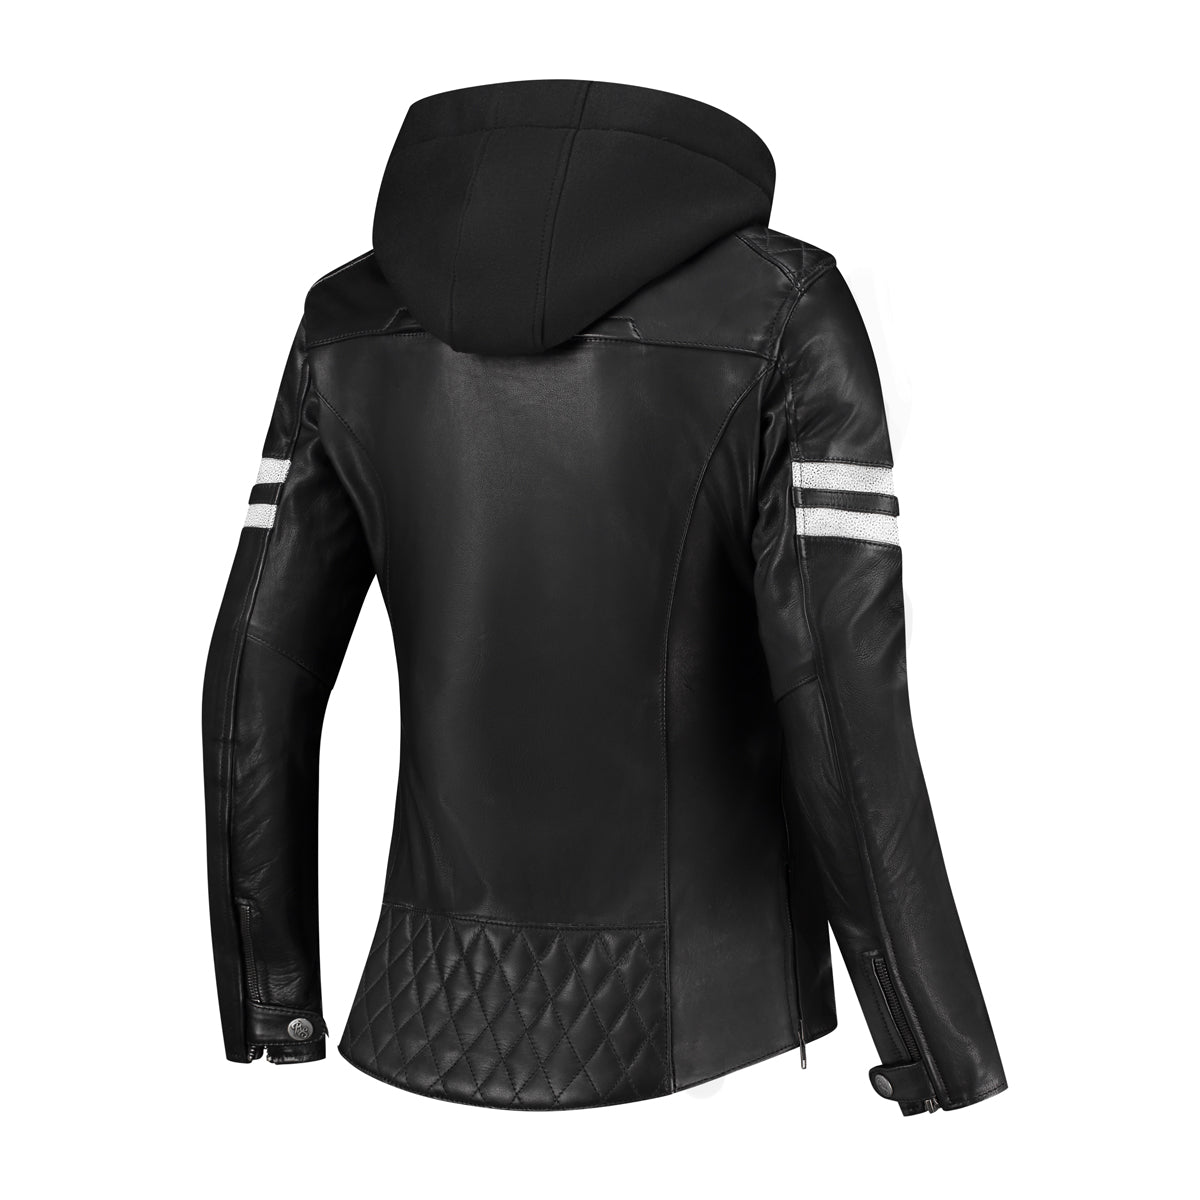 A back of black leather lady motorcycle jacket with a hood and white striped from Rusty Stitches